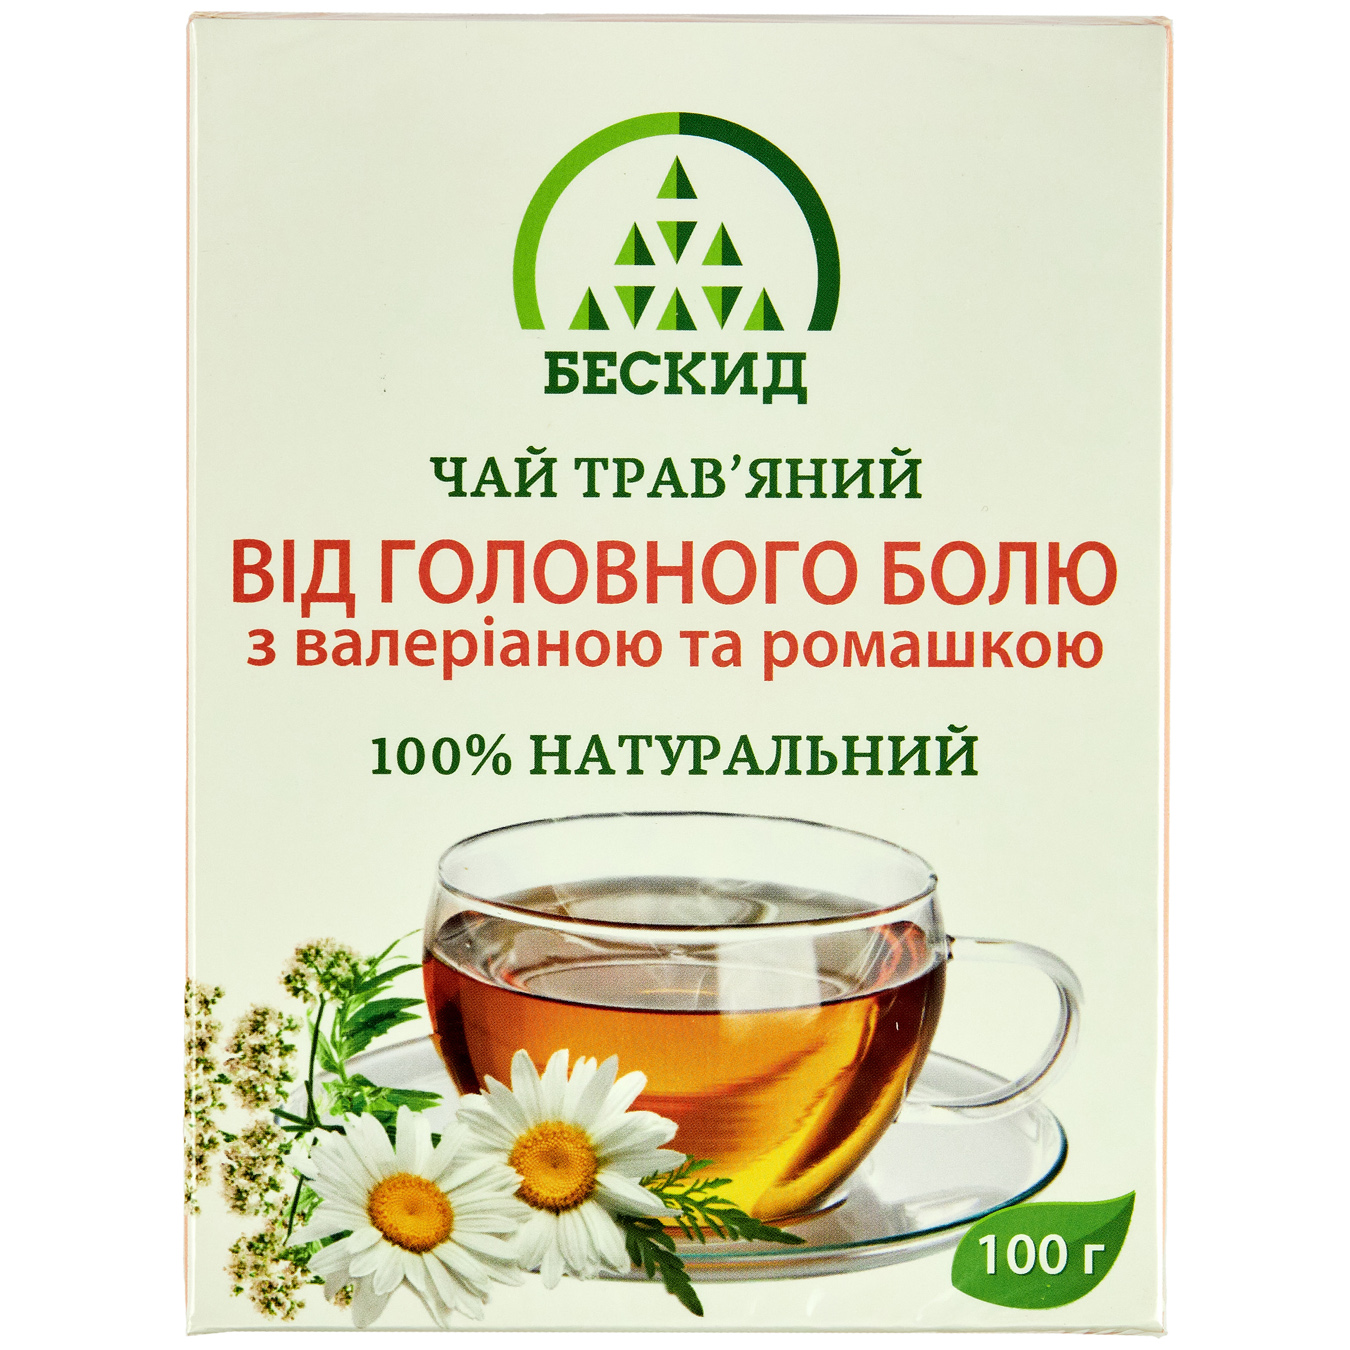 Beskyd herbal tea from headache with valerian and chamomile 100g